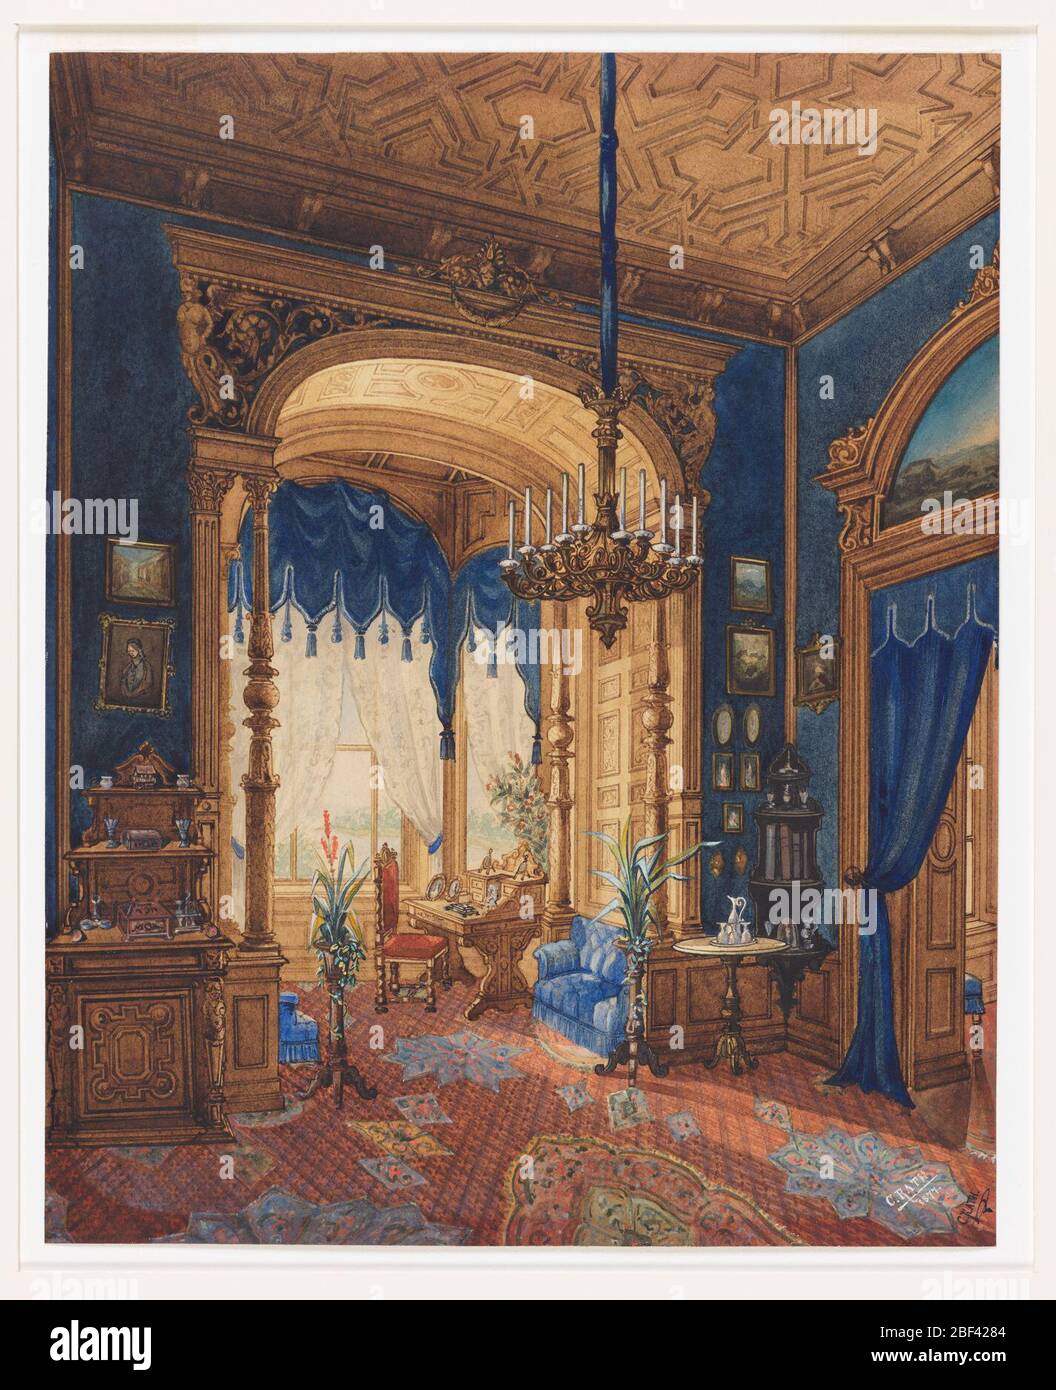 Alcove in the Salon of the Grand Duchess Anna of MecklenburgSchwerin. This interior is dominated by royal blue walls, tasselled window treatment and heavily carved ceiling and wall panels. An orange carpet is decorated with Islamic motifs. Stock Photo